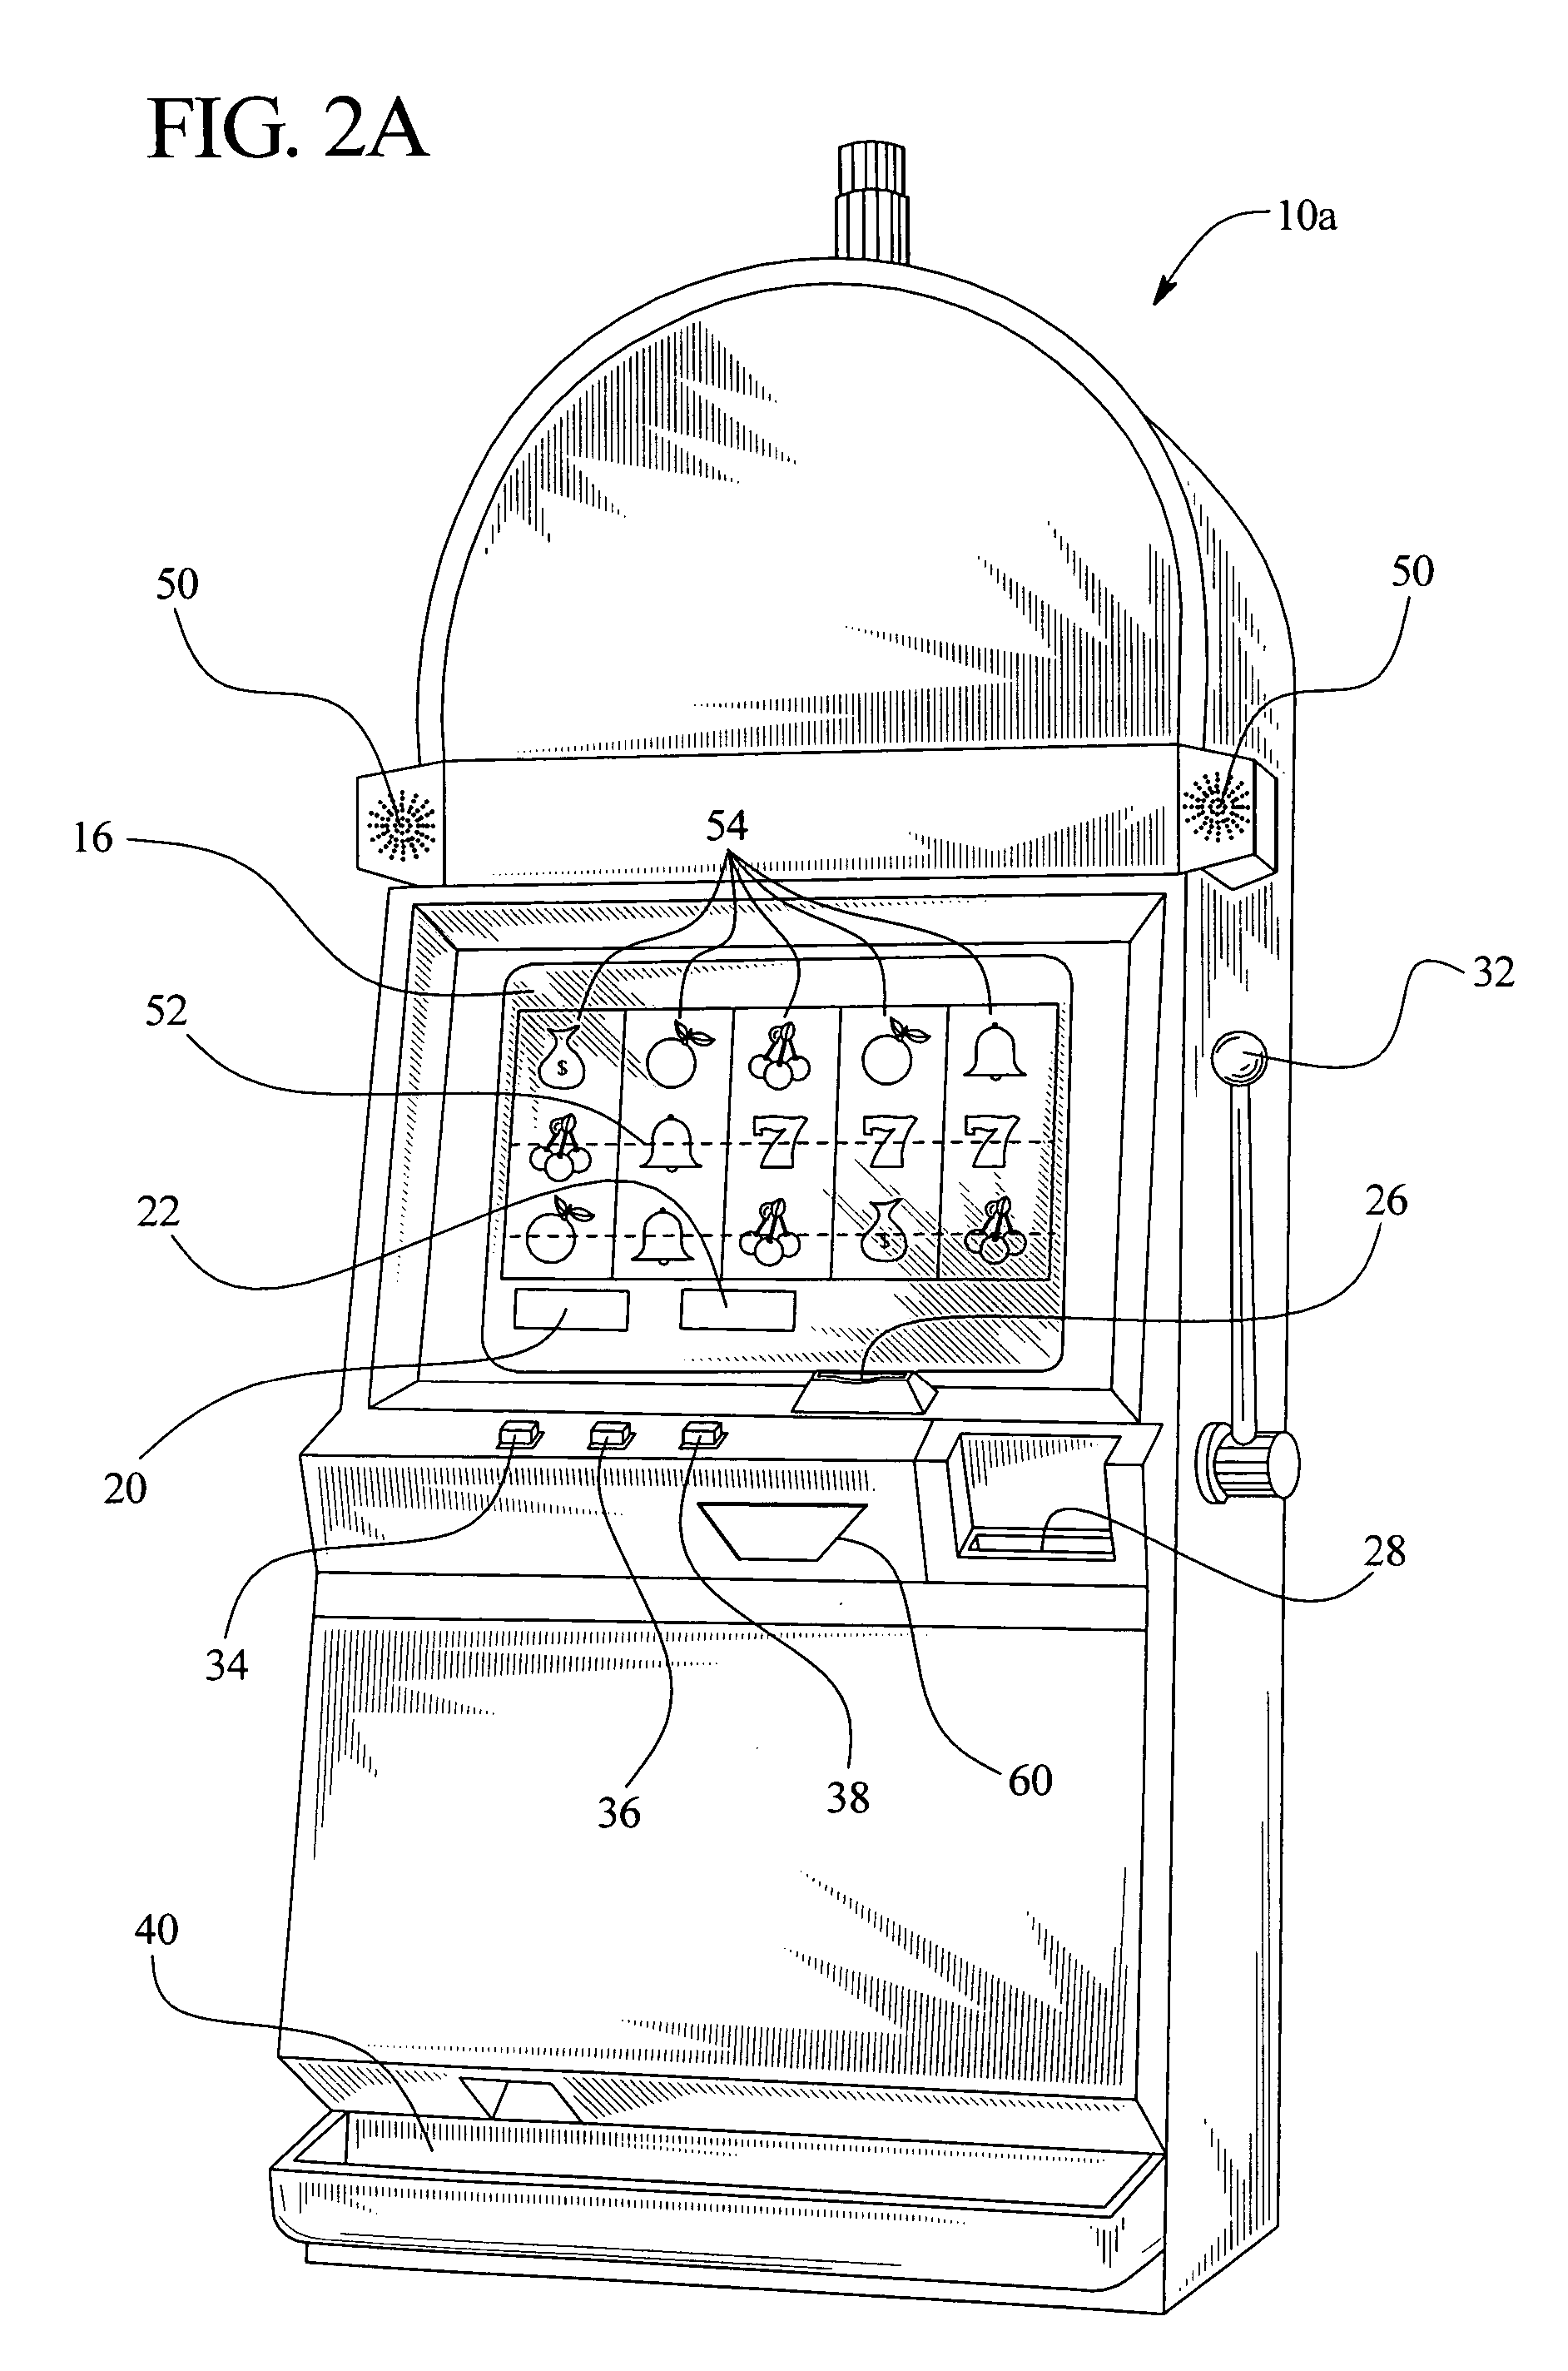 Wireless operation of a game device